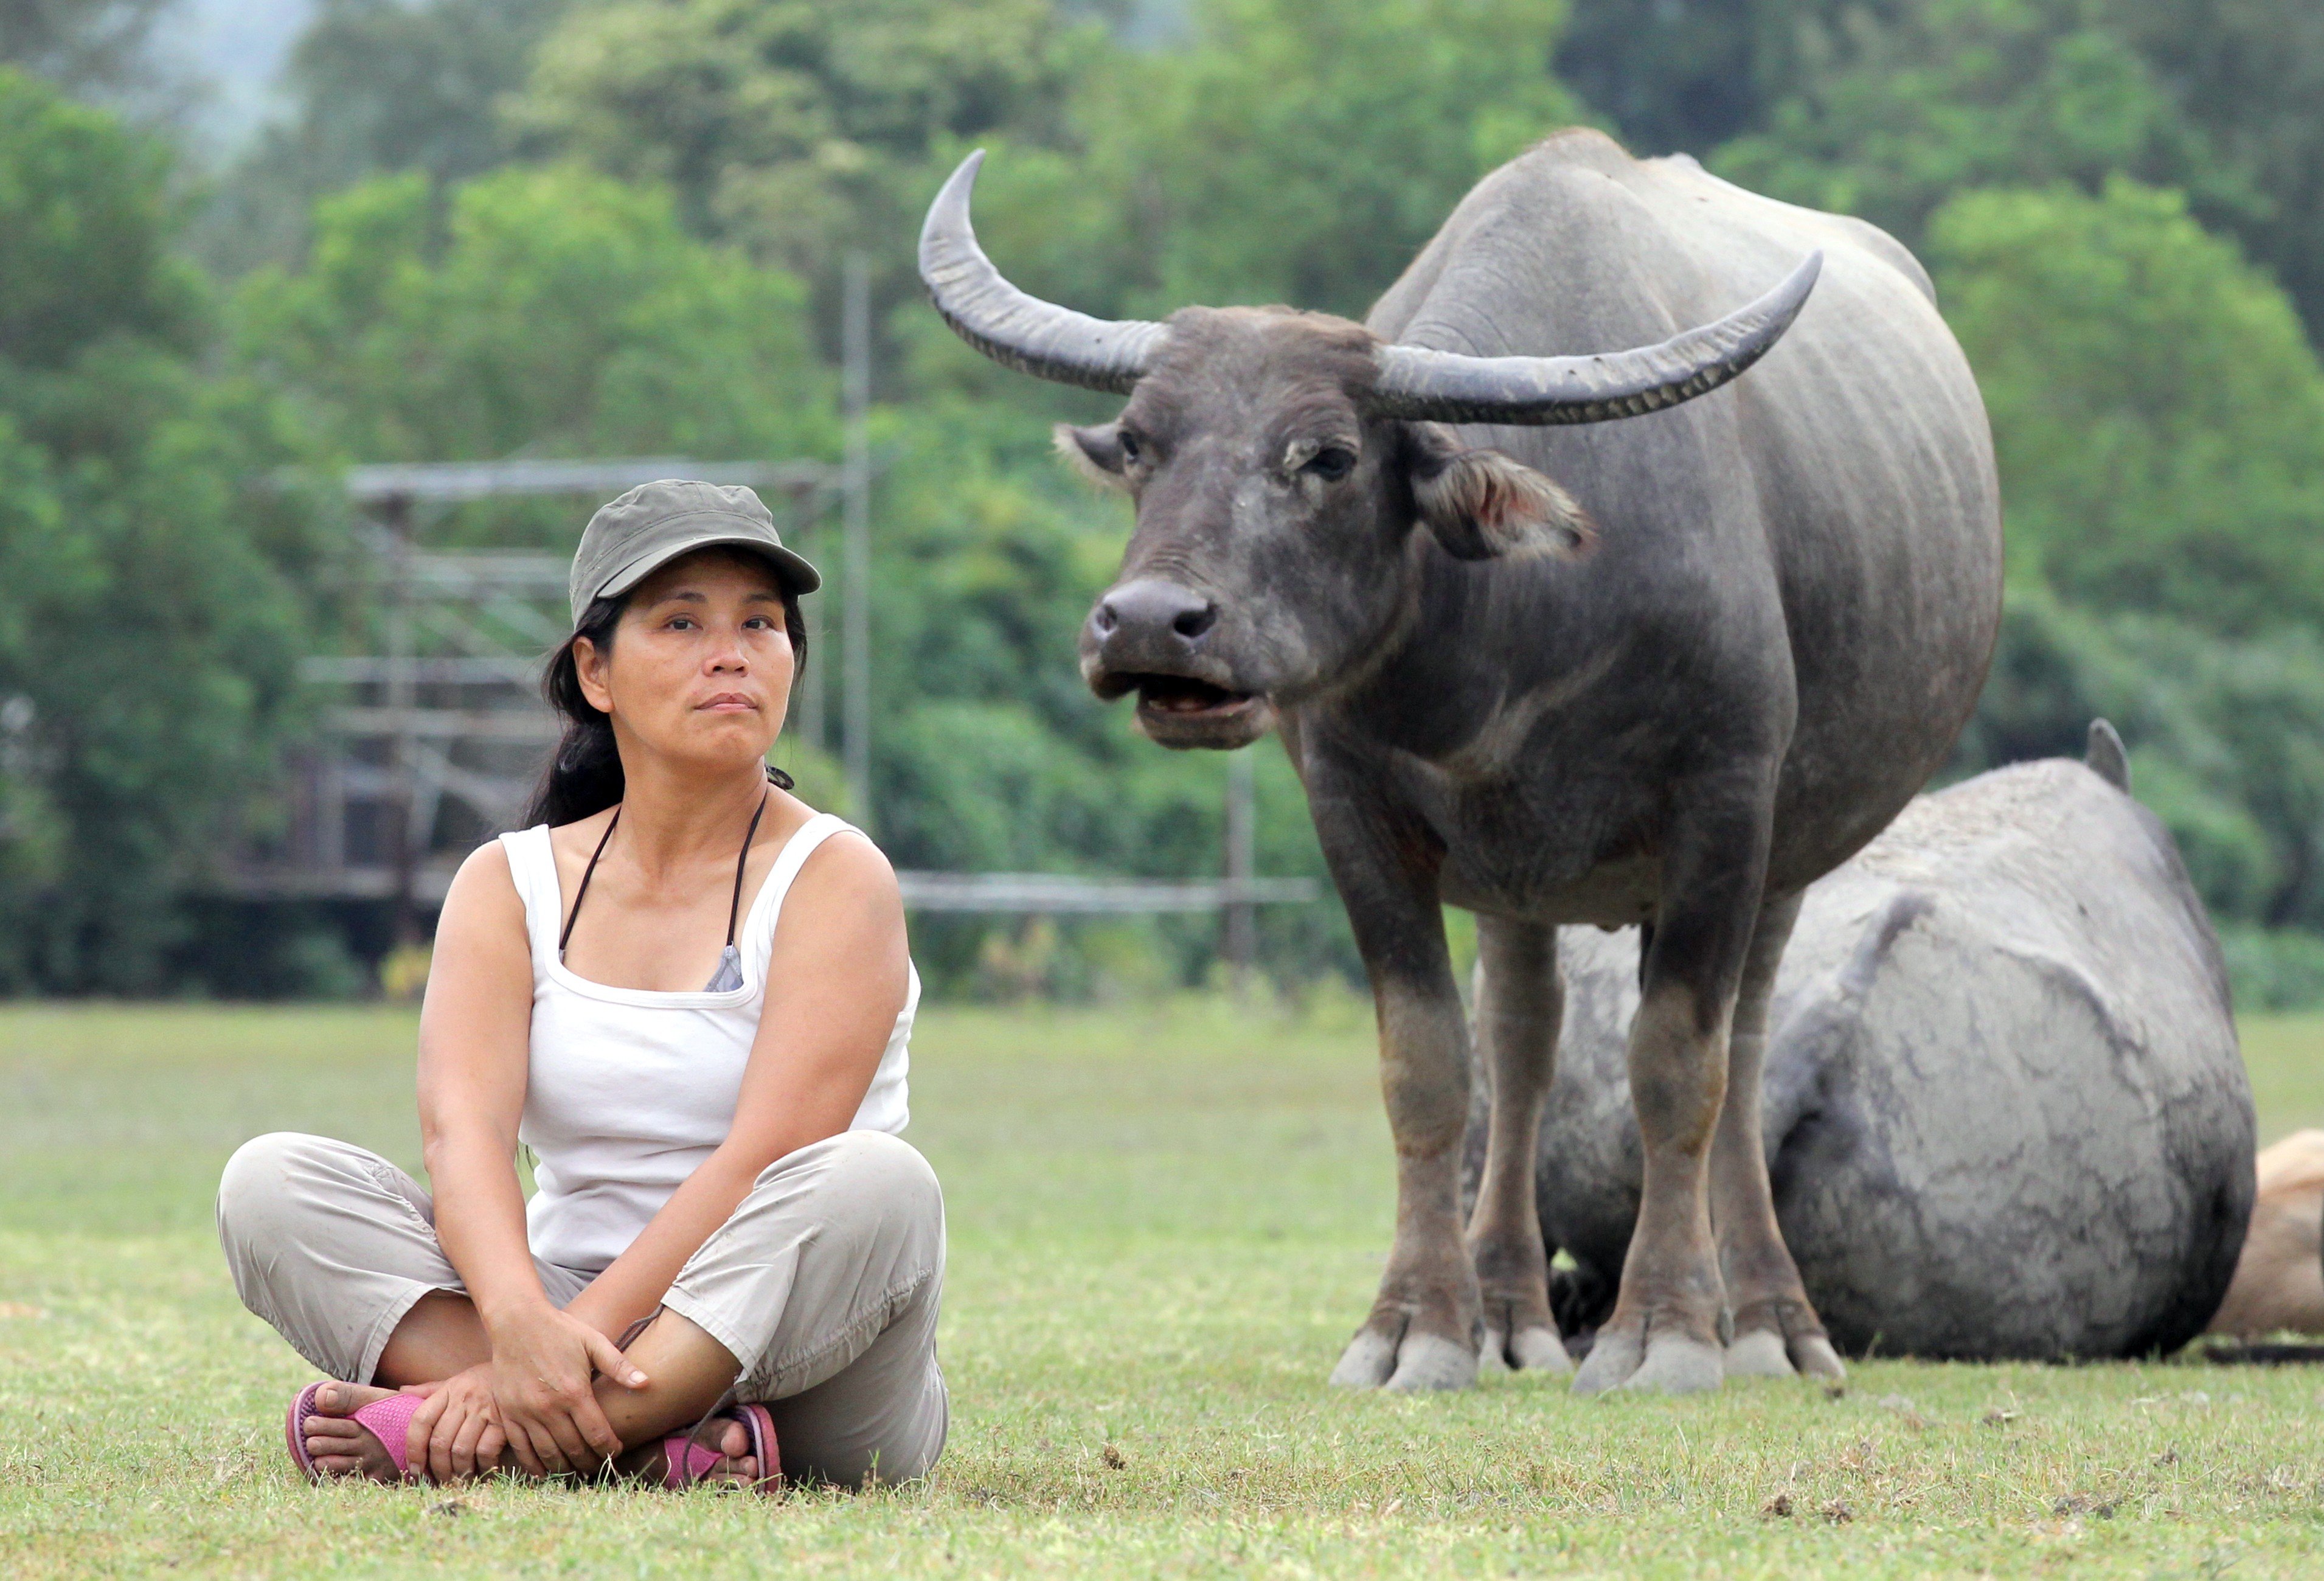 Wild brown cattle and water buffaloes continue to stray into urban areas despite government efforts to keep them out